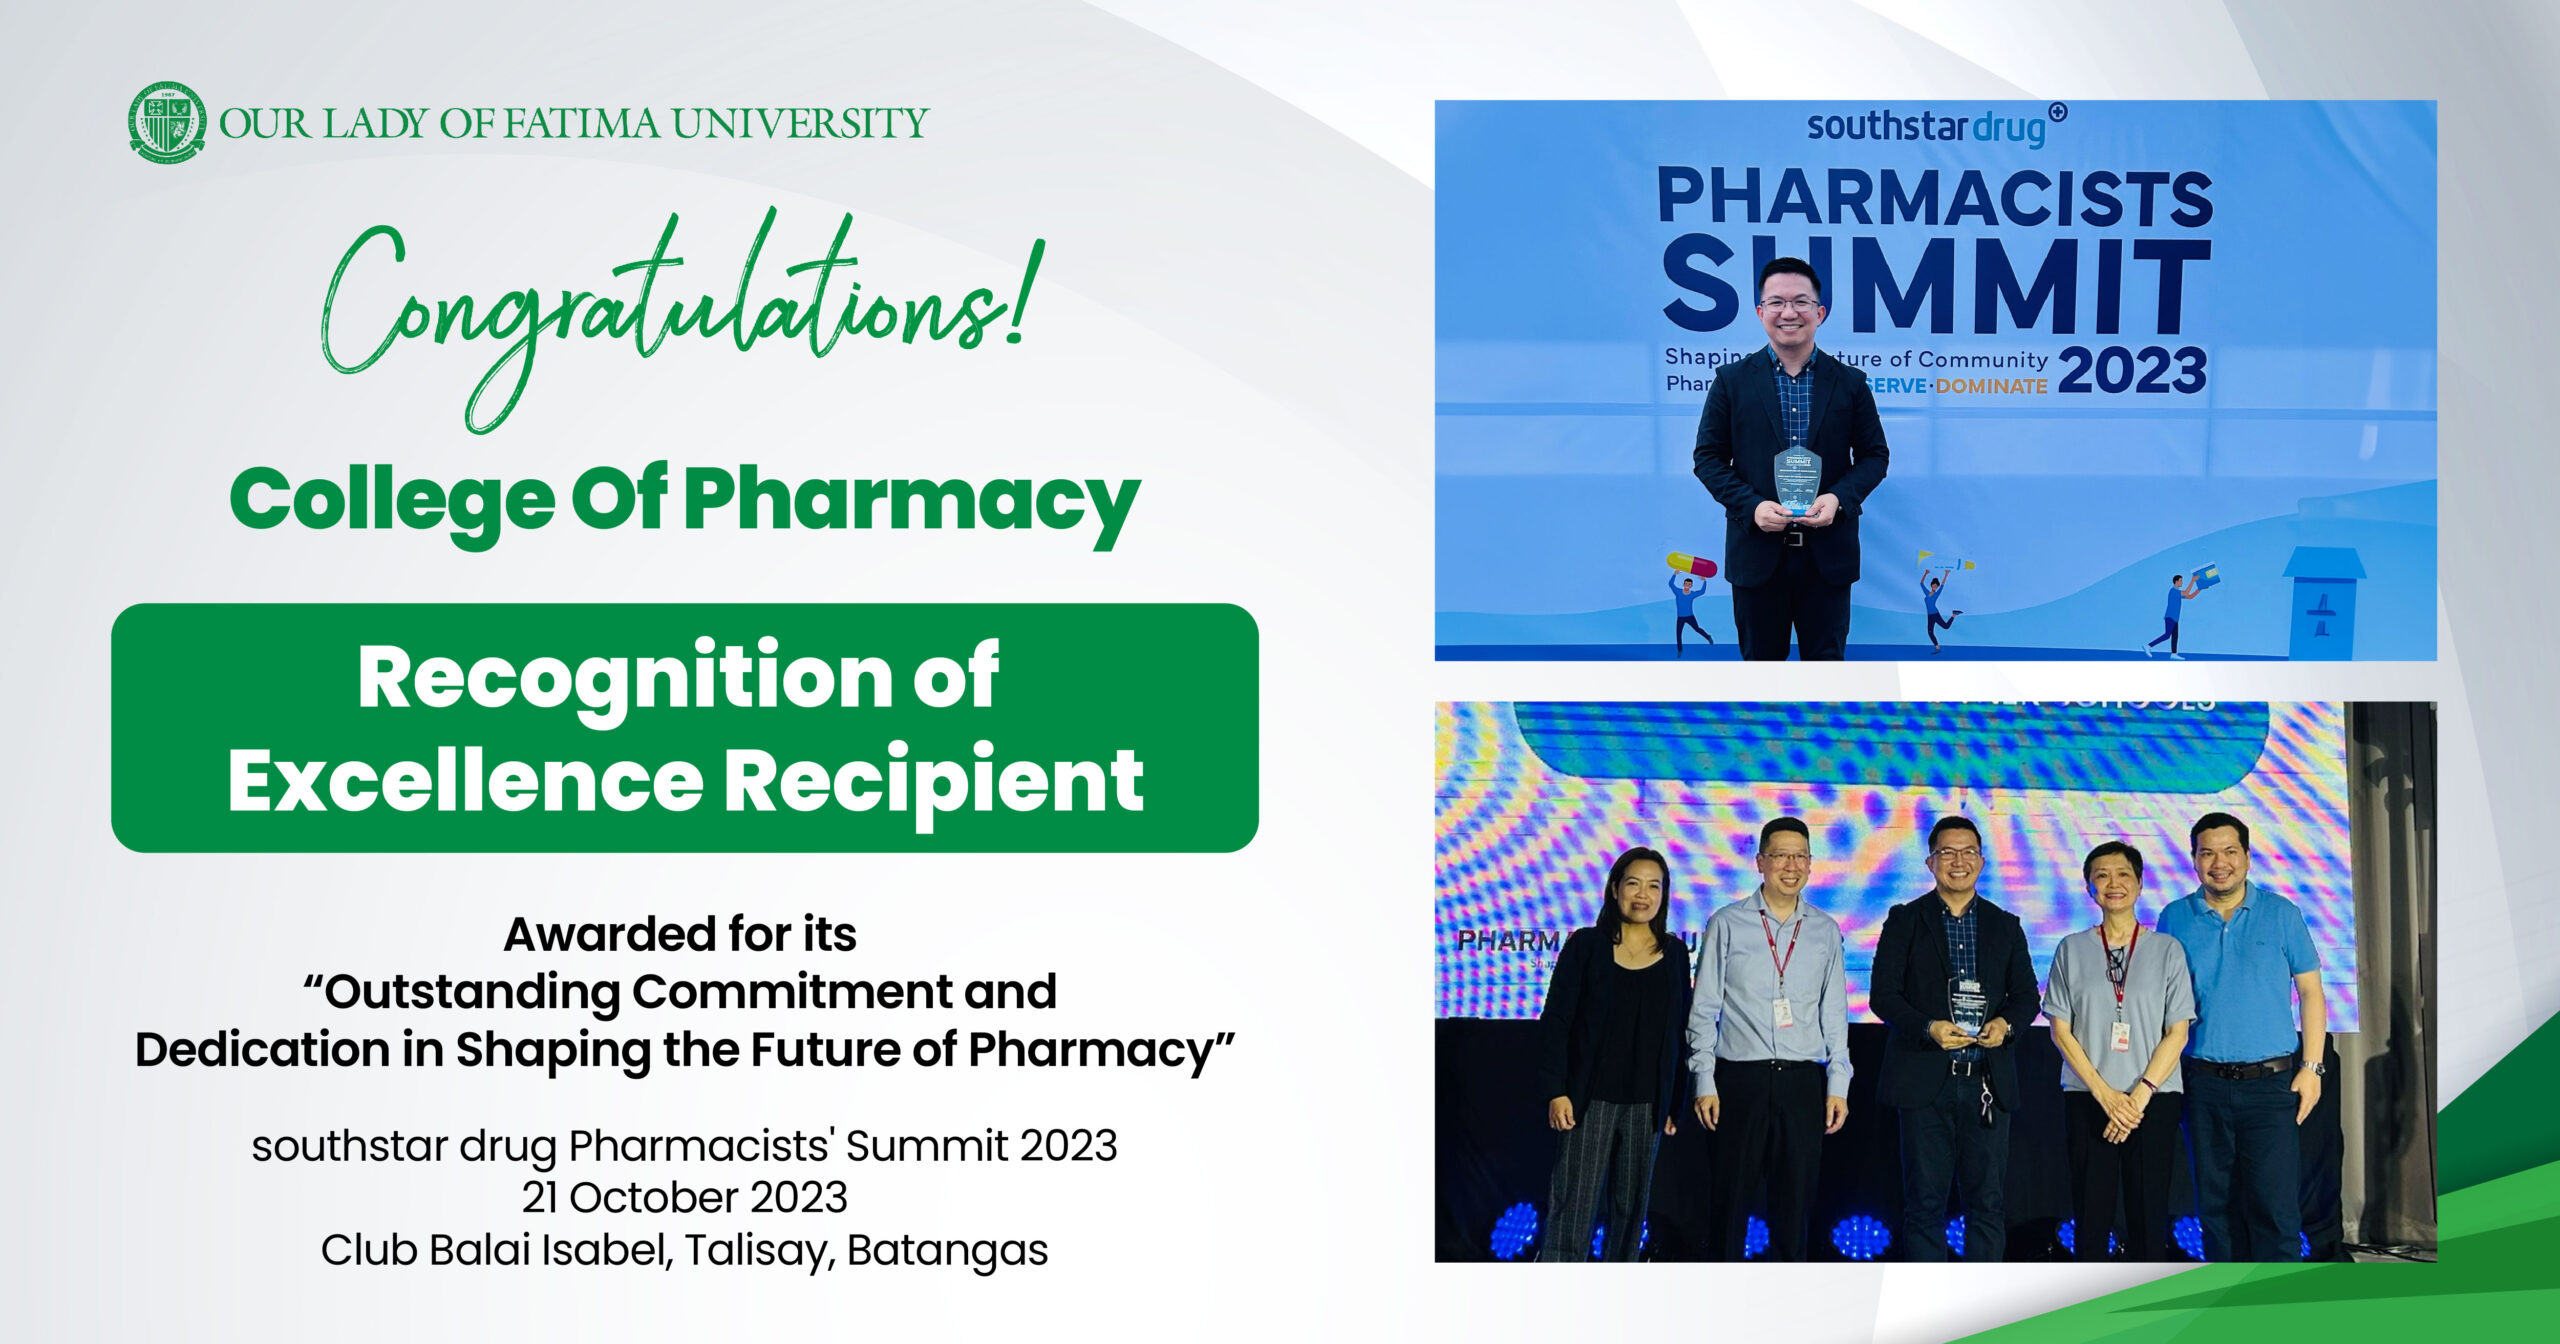 OLFU’s Pharmacy conferred with Recognition of Excellence by Southstar Drug